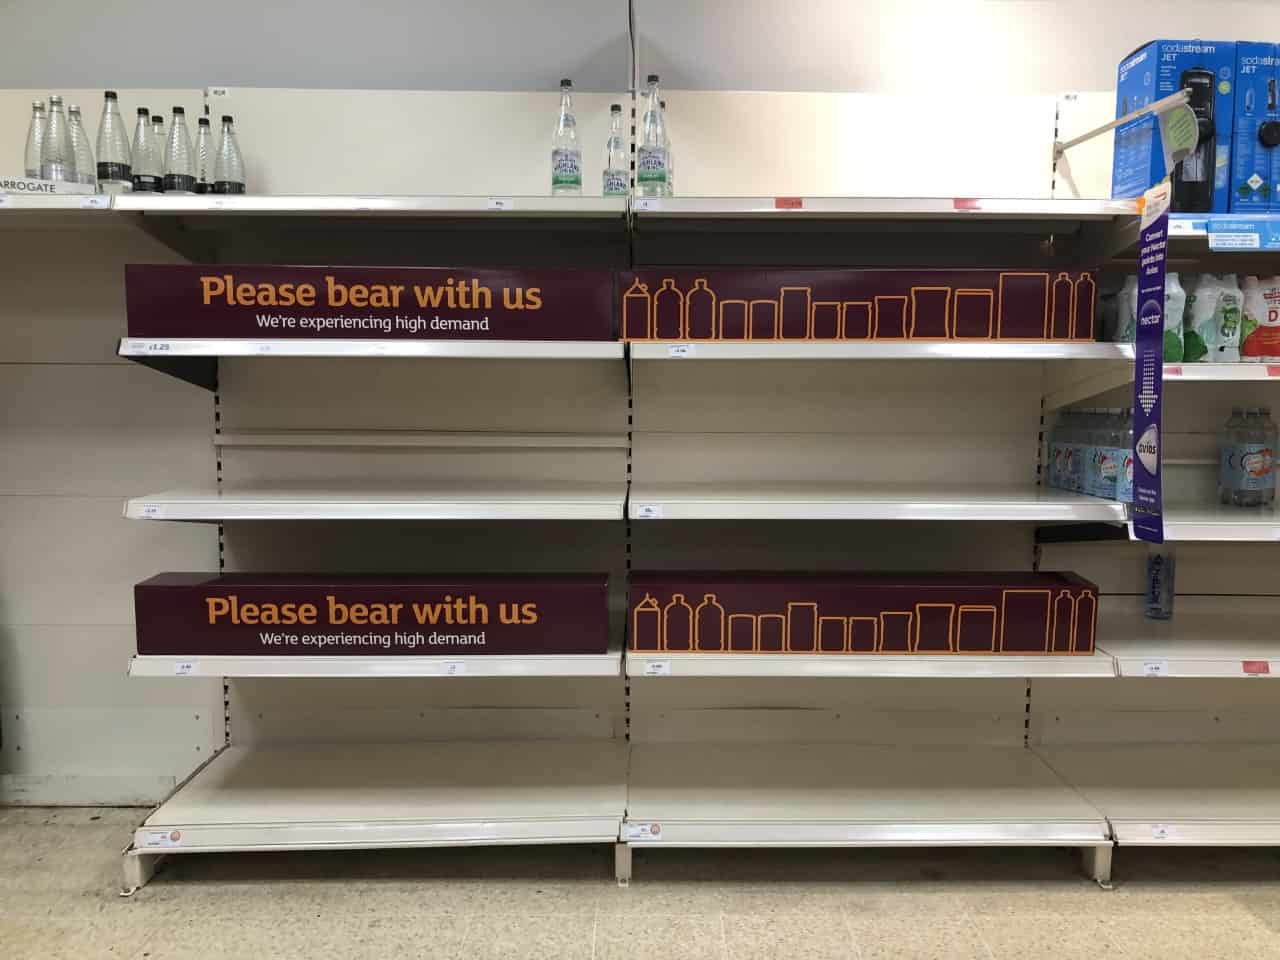 Pictures of empty shelves flood social media as farmers warn of Brexit food crisis